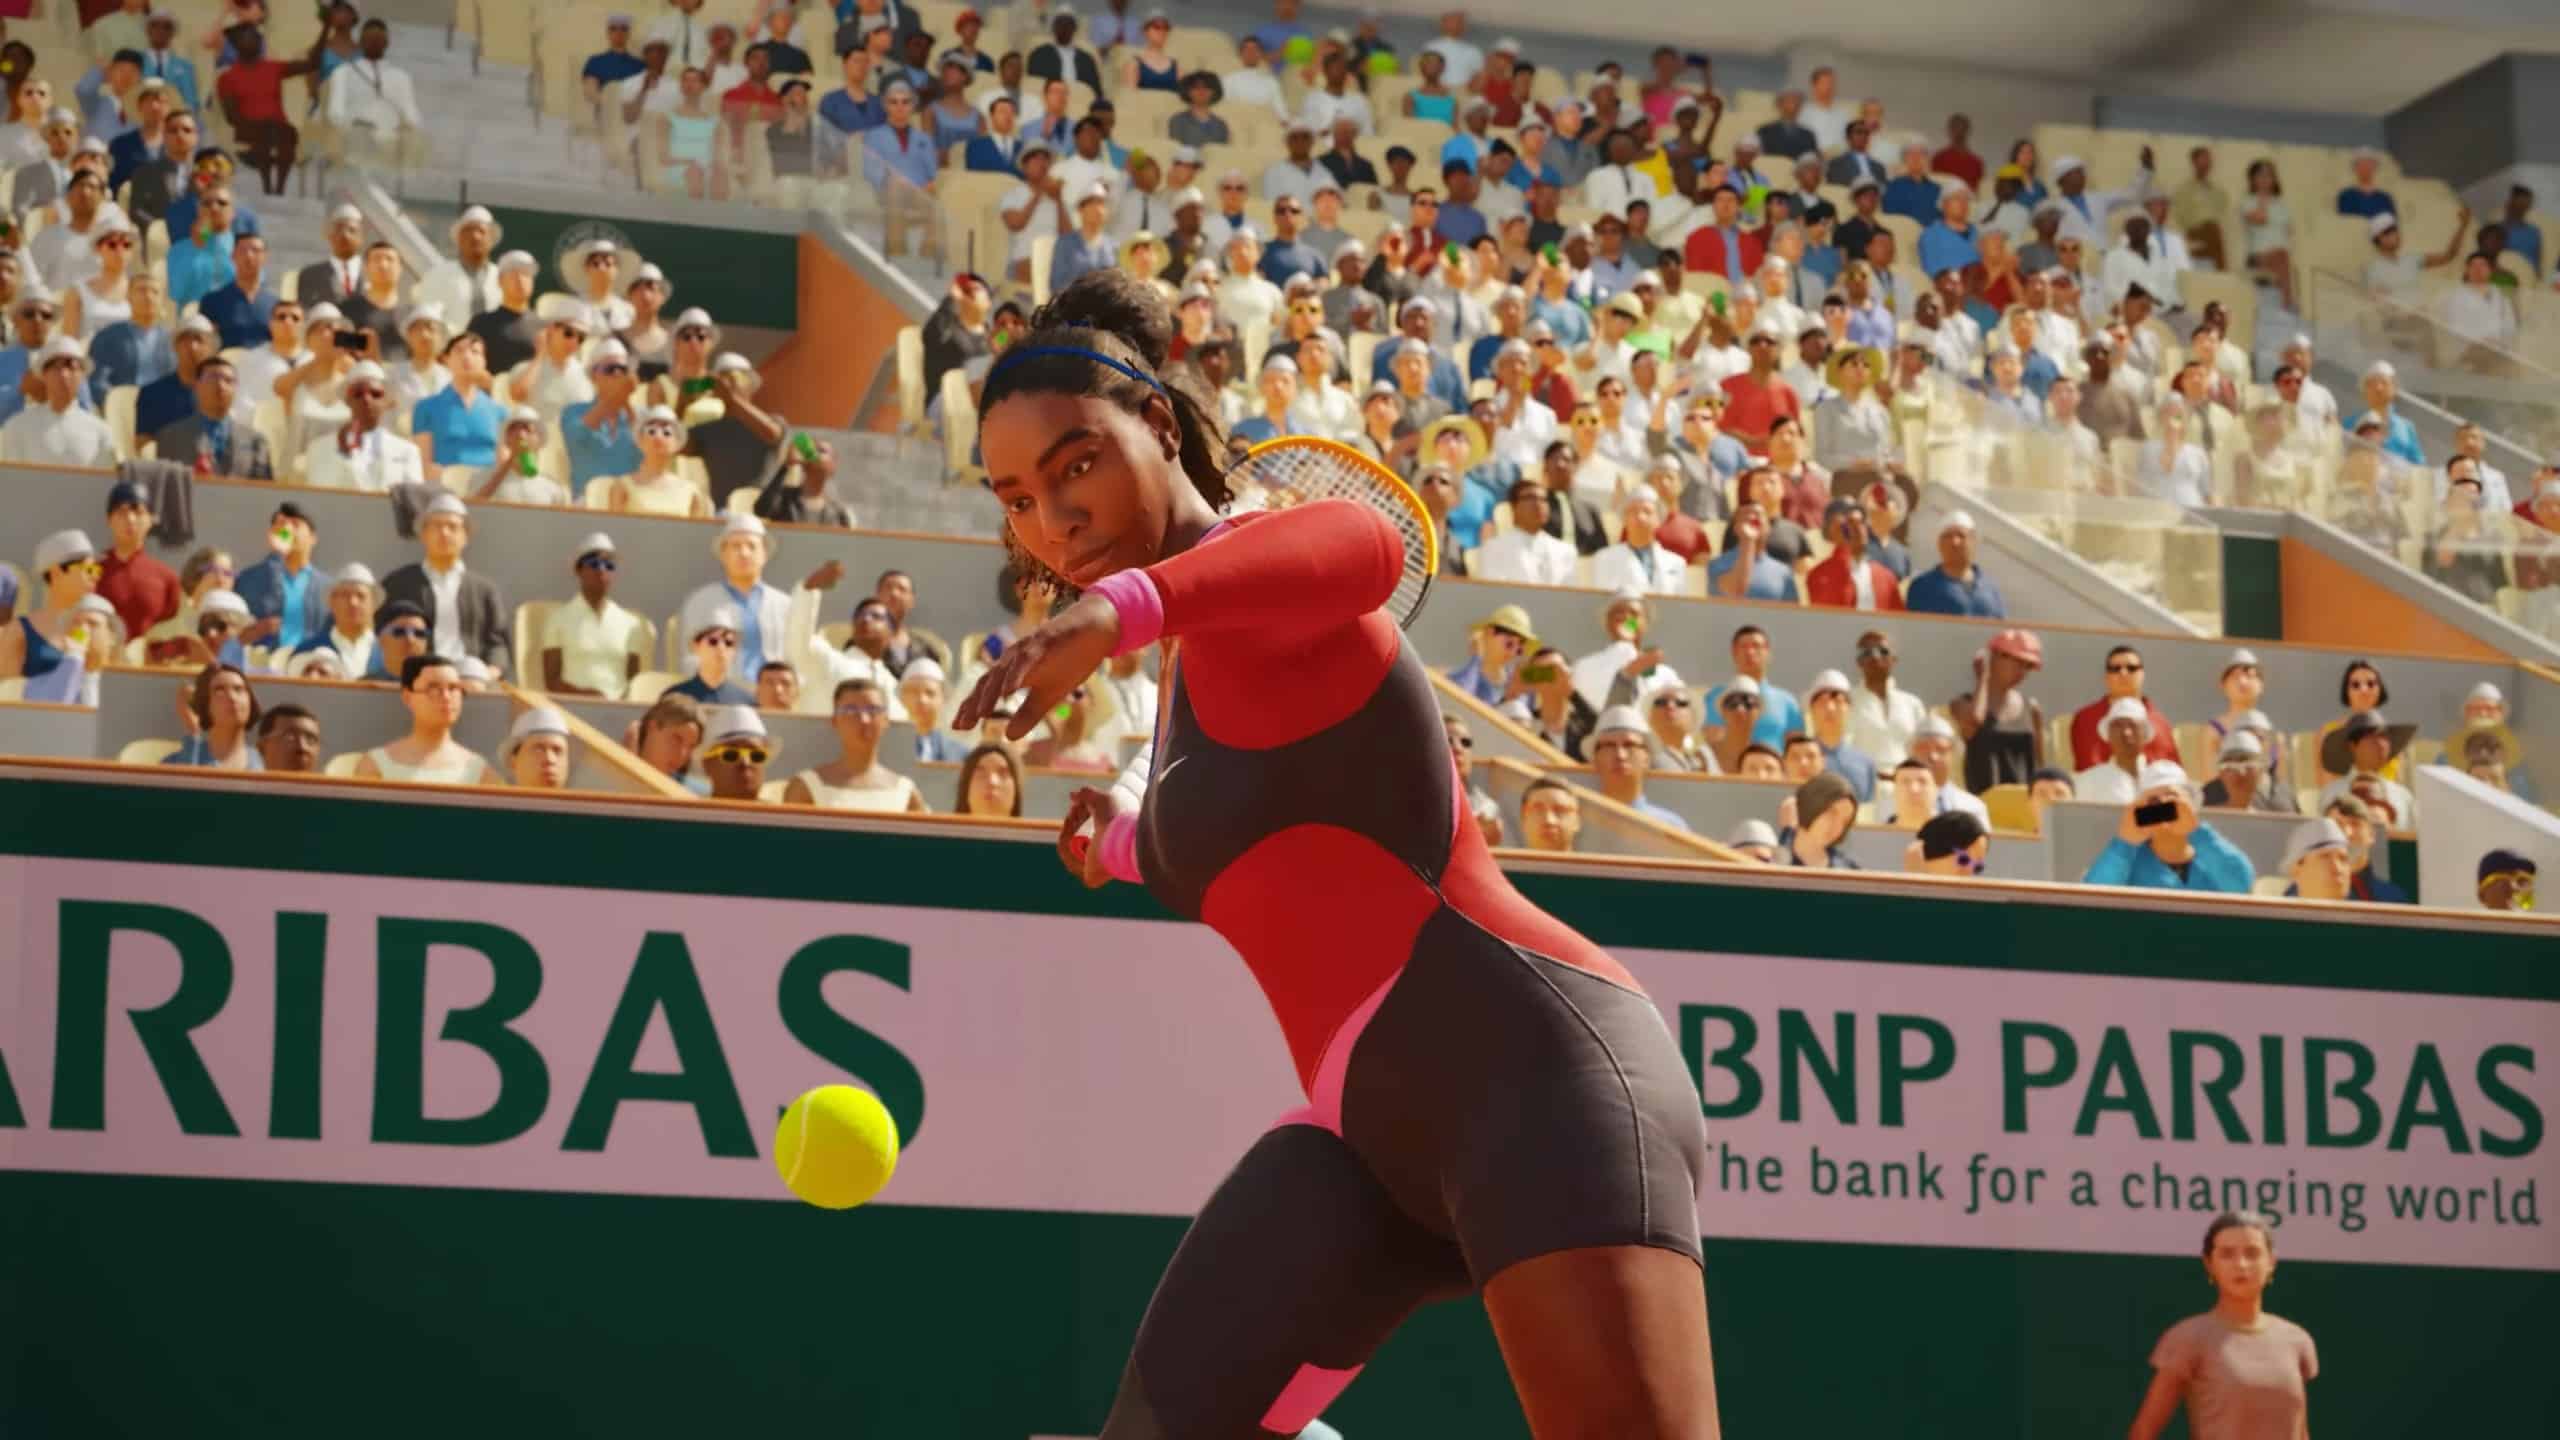 TopSpin 2K25 release date: Serena Williams preparing to hit a ball during a match.